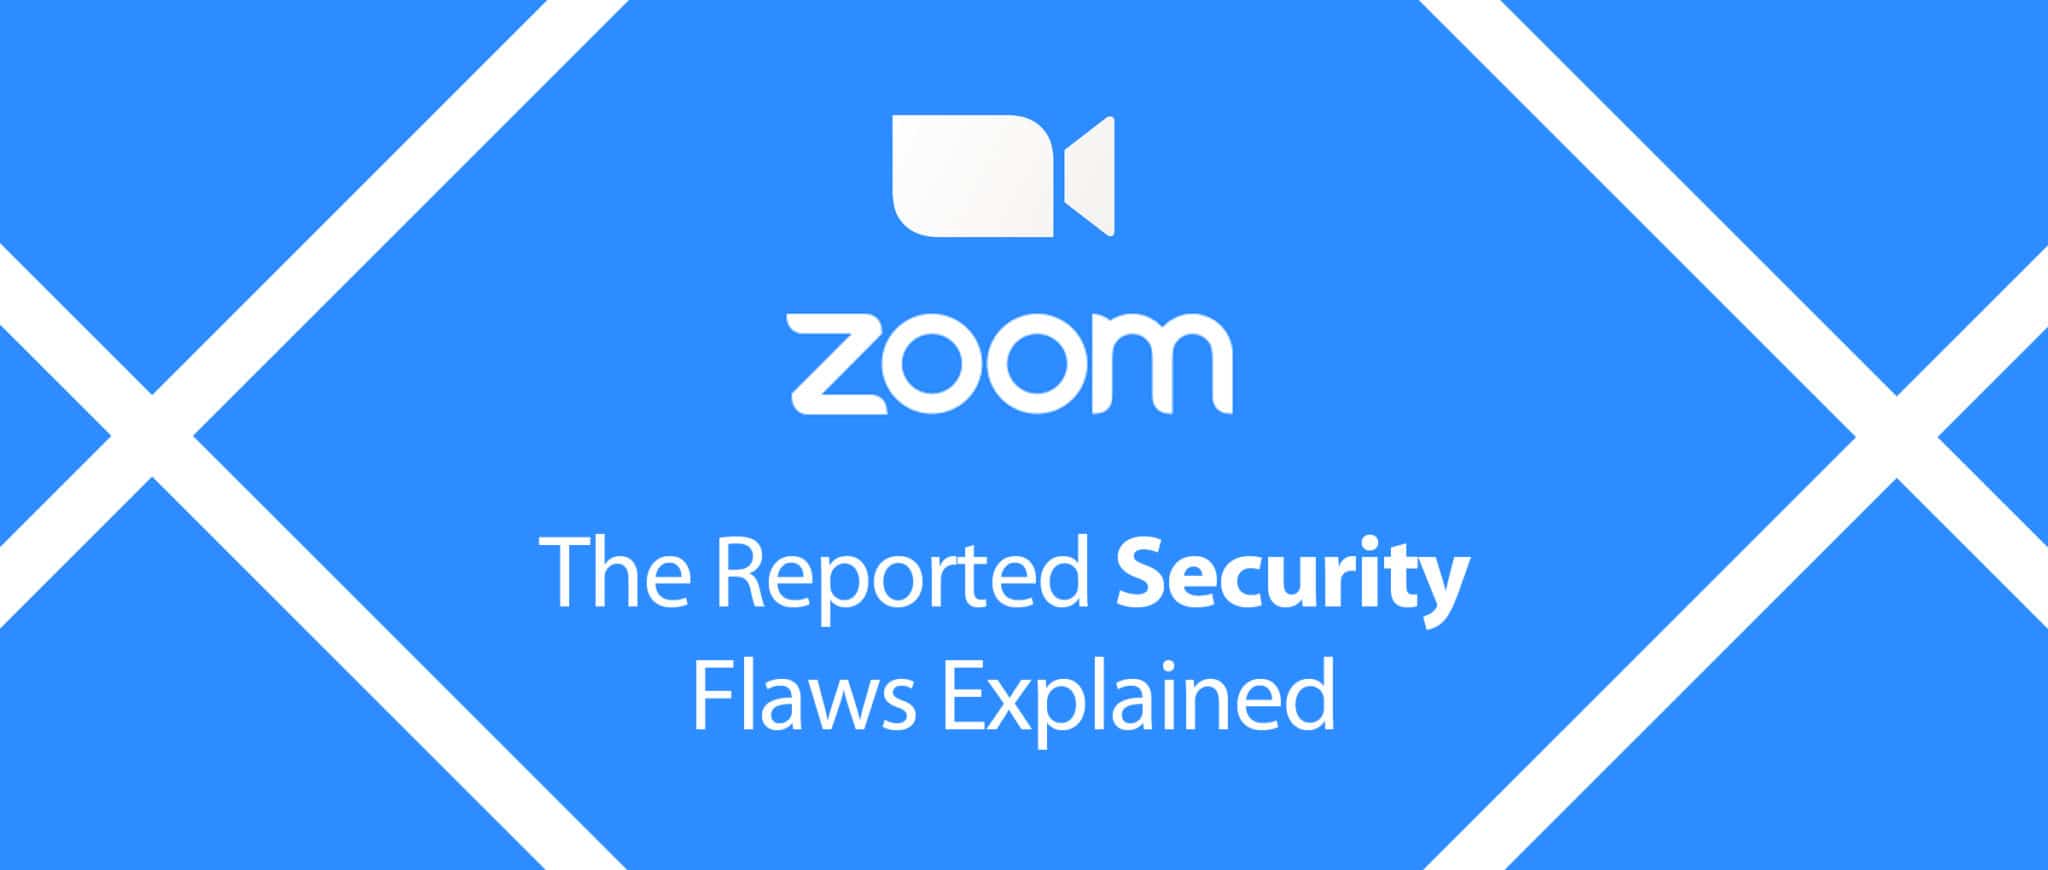 flaws in deleted zoom keybase app